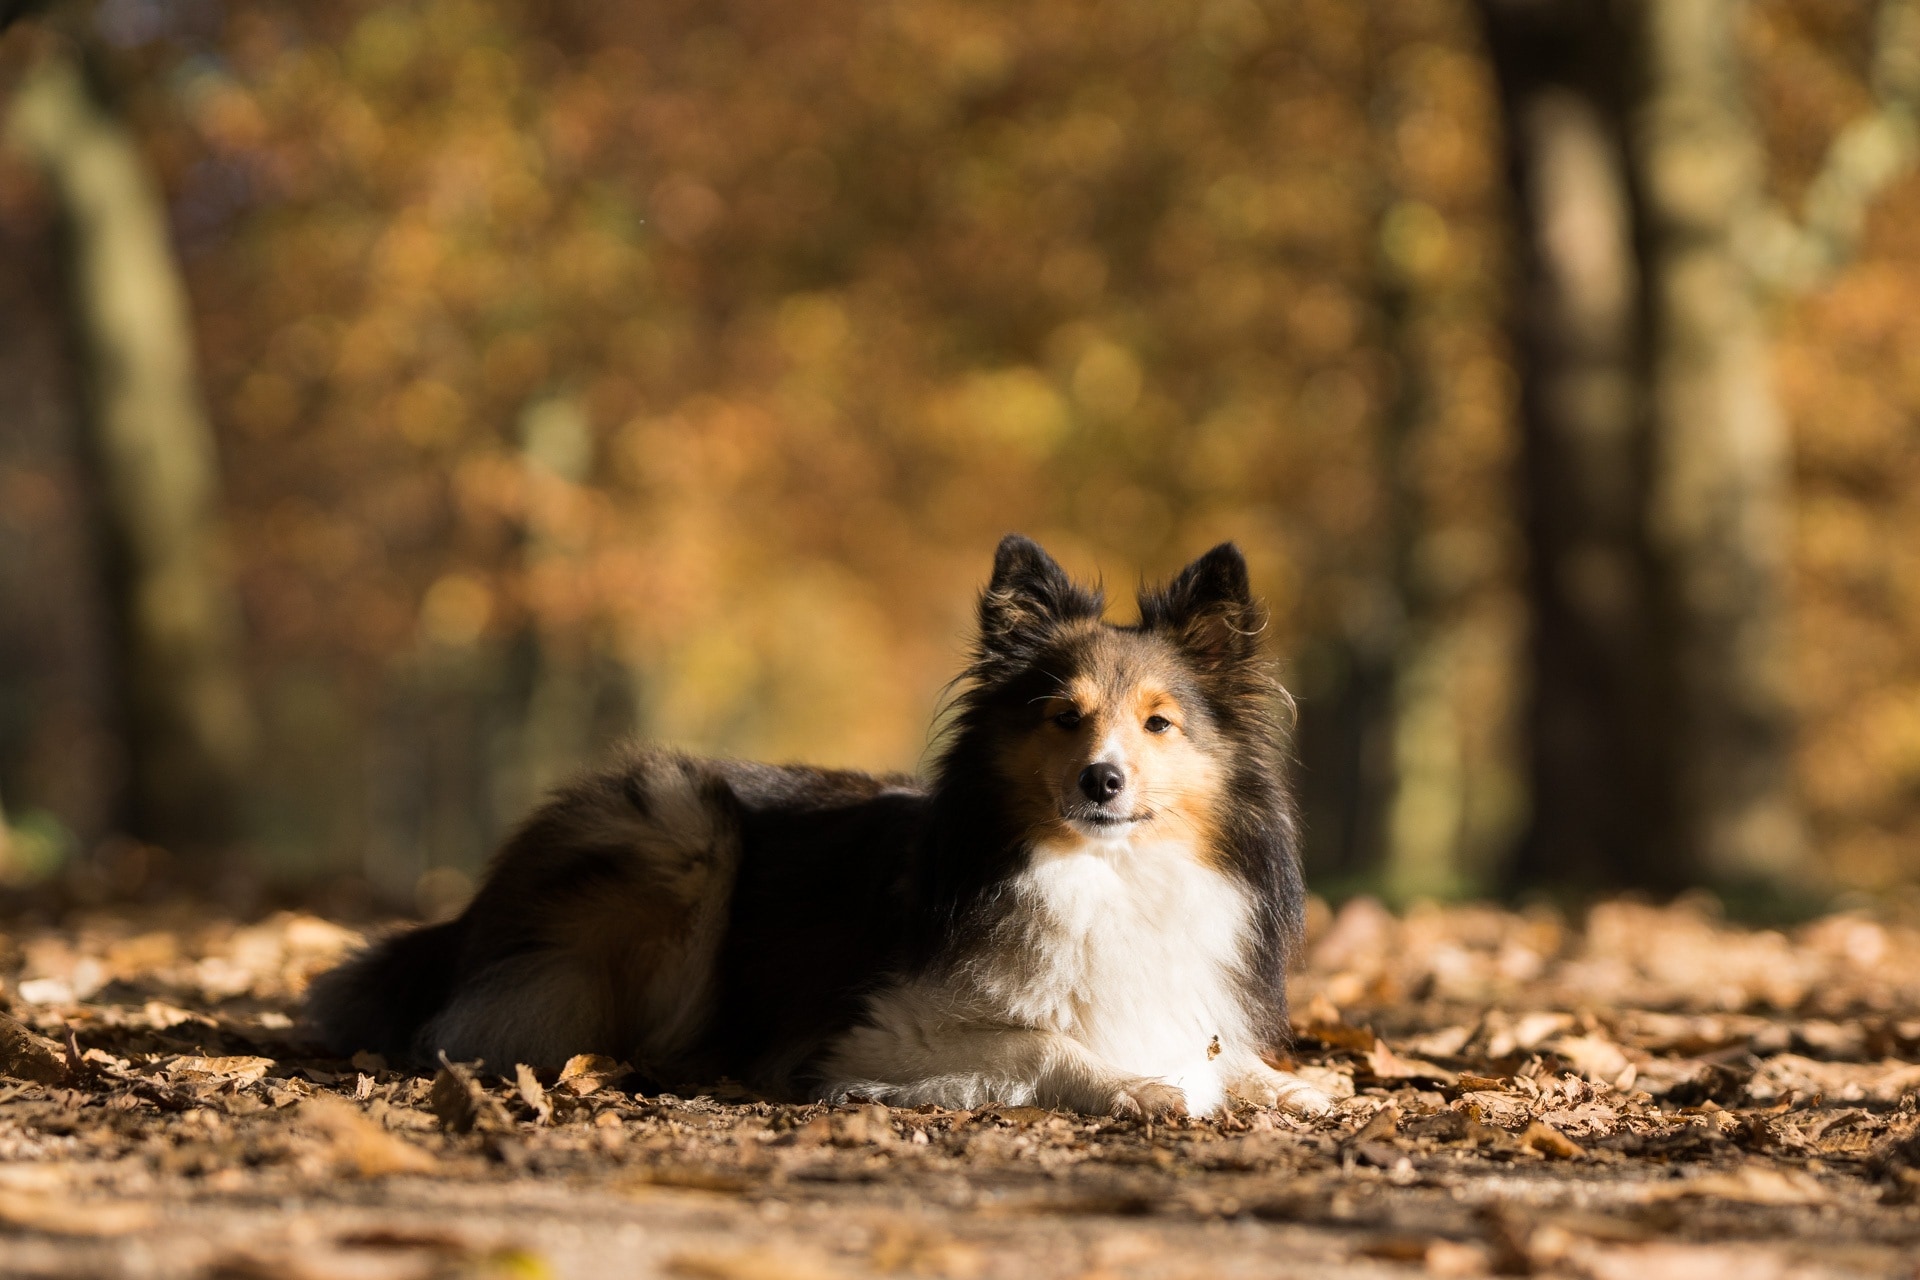 black and brown medium size dog lying while surrounded by dried leaves